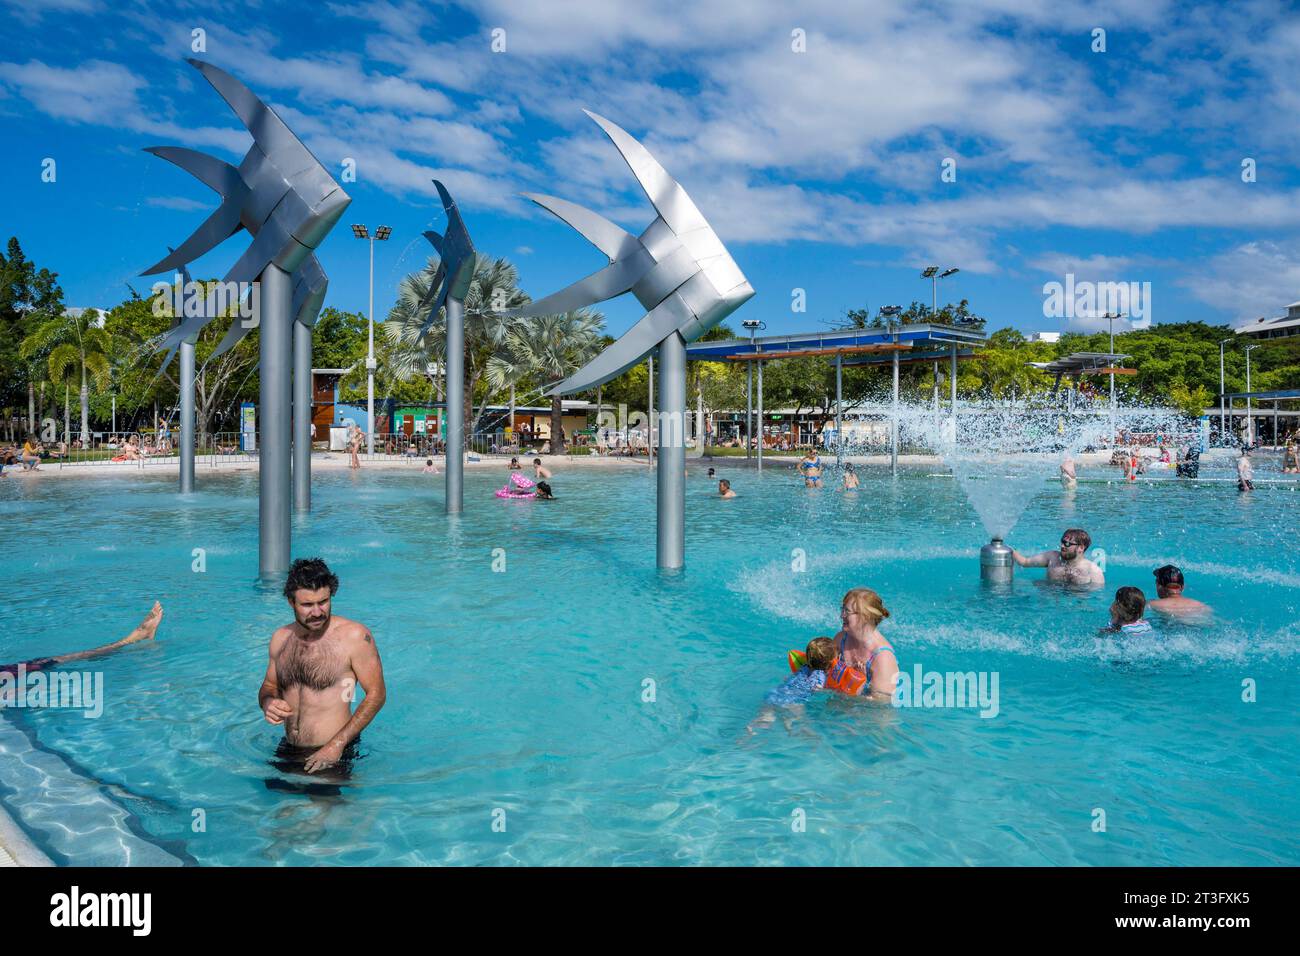 Australia, Queensland, north coast, Cairns, the Cairns esplanade, the lagoon, geant swimming pool open for free Stock Photo